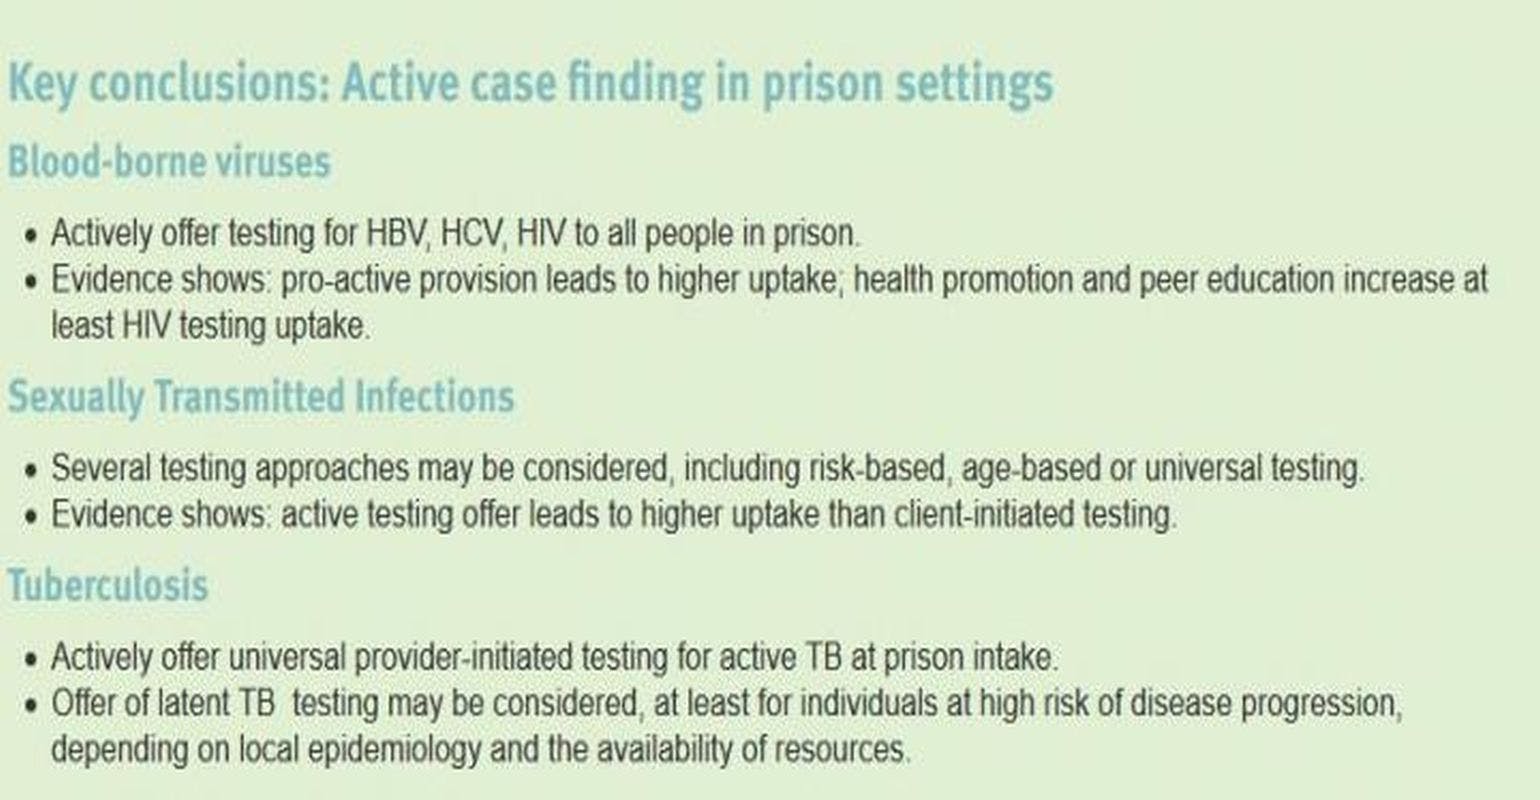 ECDC and EMCDDA Make the Case for Active Case-Finding of Communicable Diseases in Prison